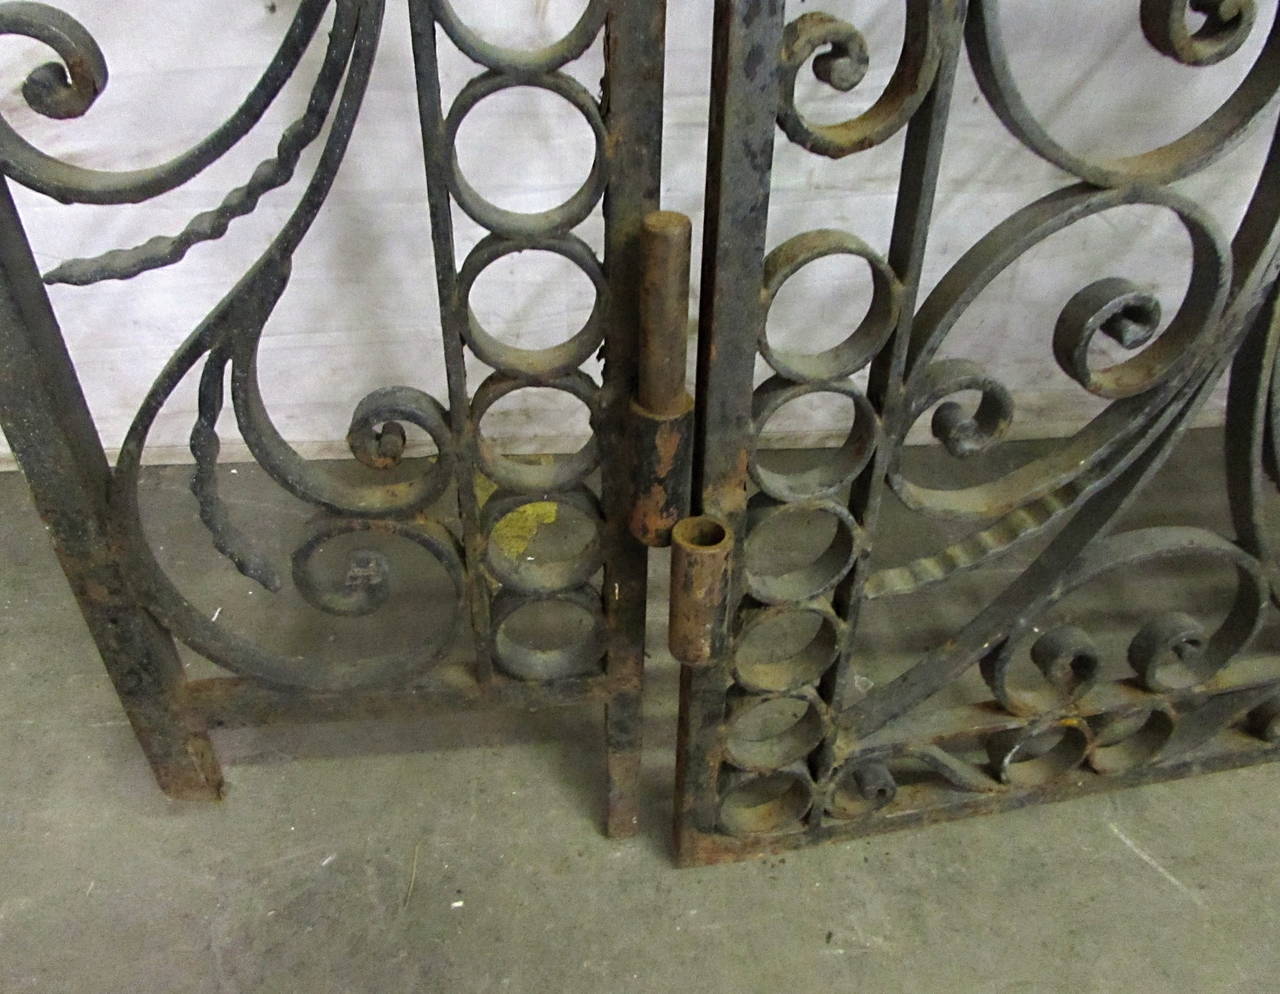 Mid-20th Century 1950s Highly Ornate Wrought Iron Entry Gates with Surround